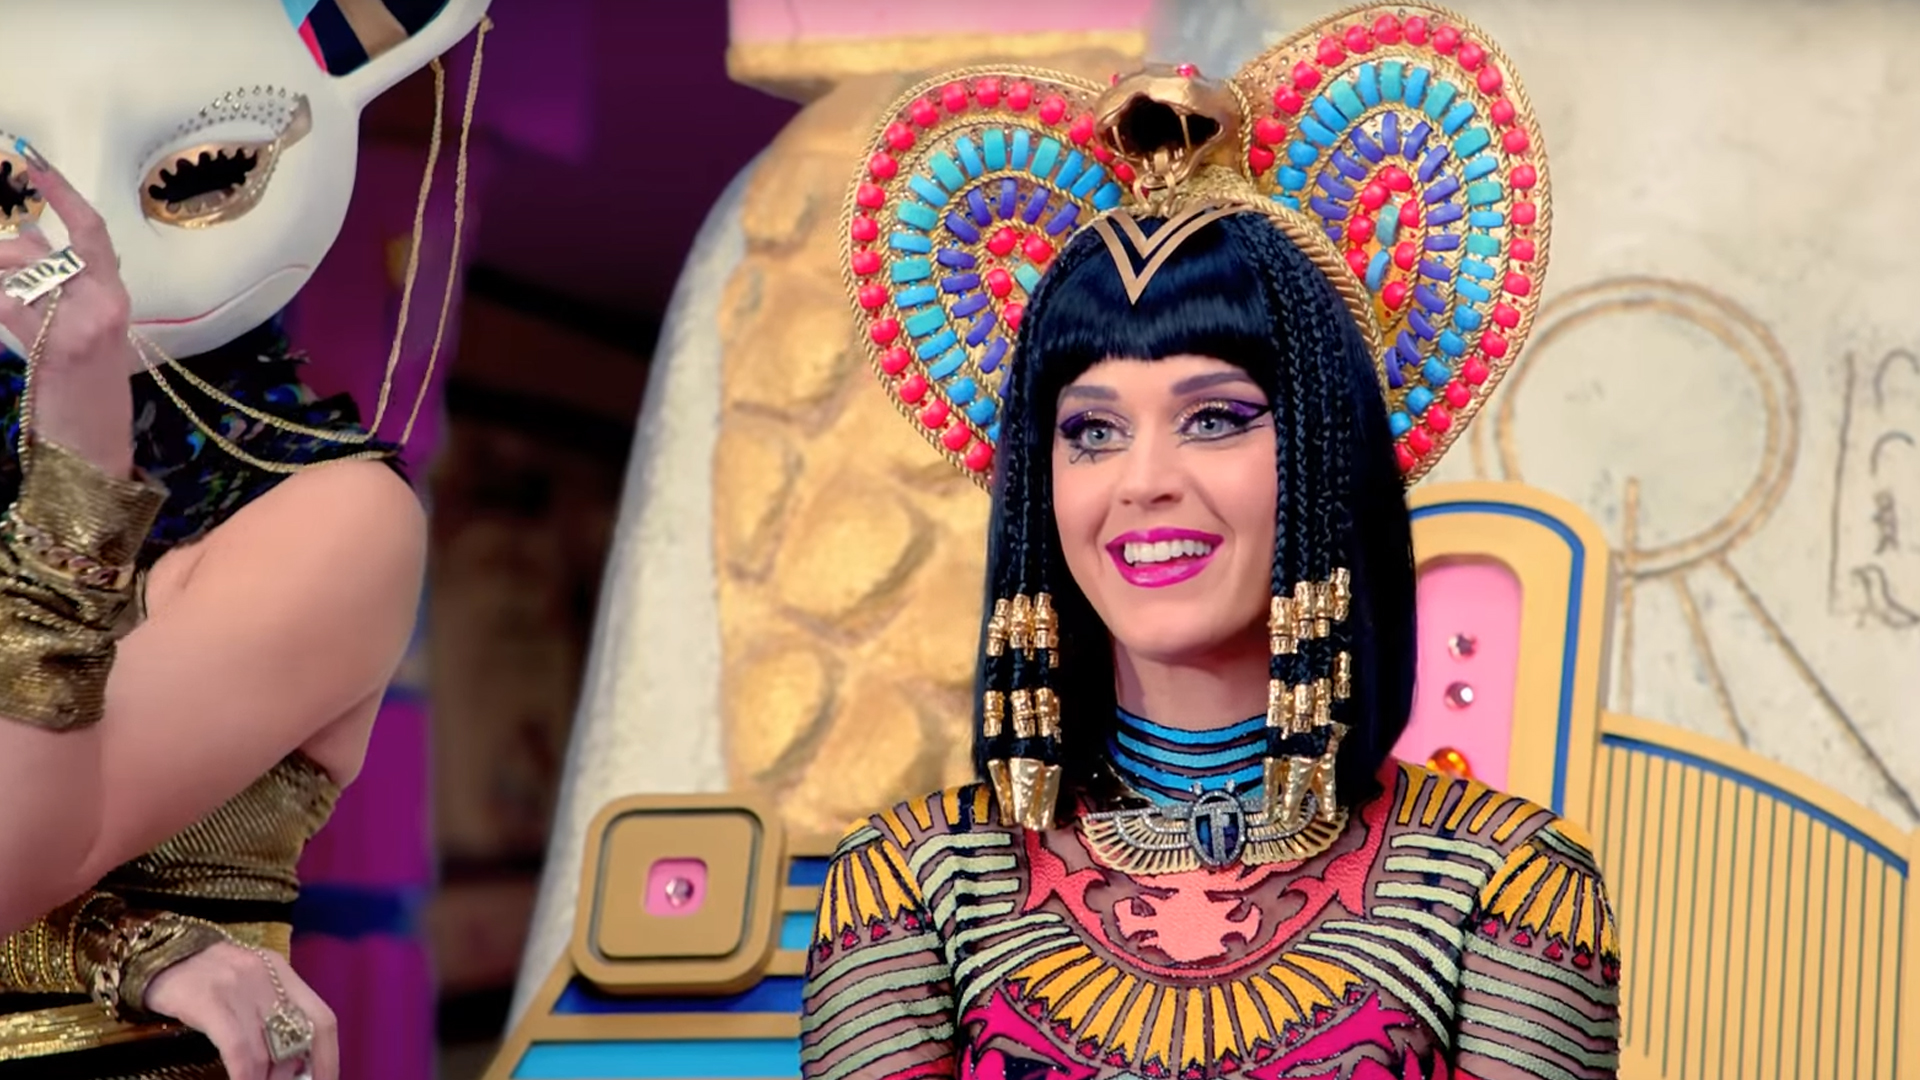 Katy Perry, Juicy J And Dr. Luke Liable For Copyright Infringement For 'Dark Horse'